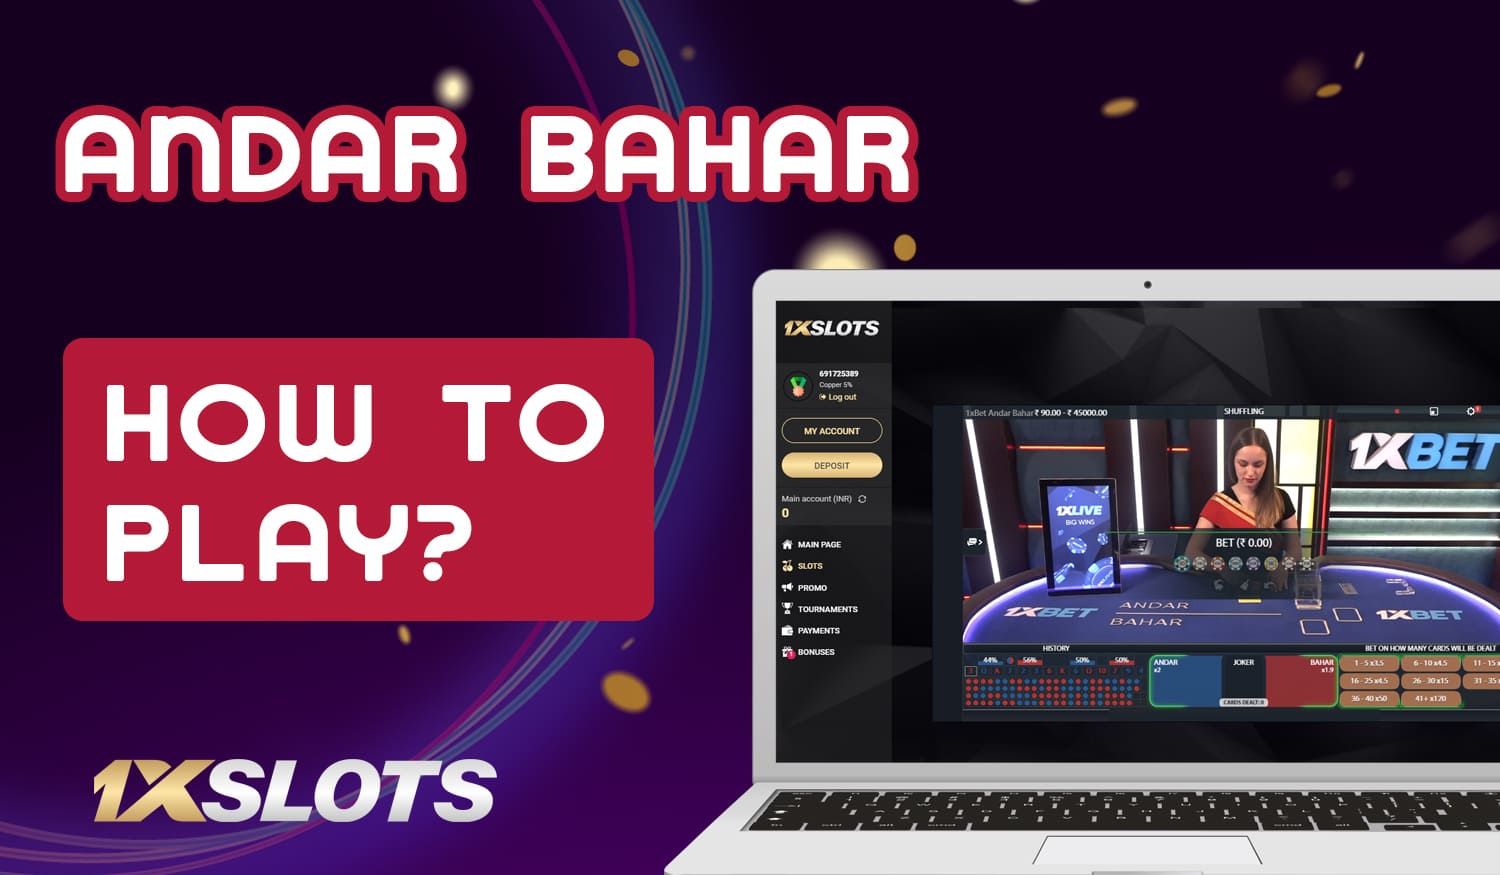 Step-by-step instructions for new users of online casino 1Xslotsfrom India how to start playing Andar Bahar.